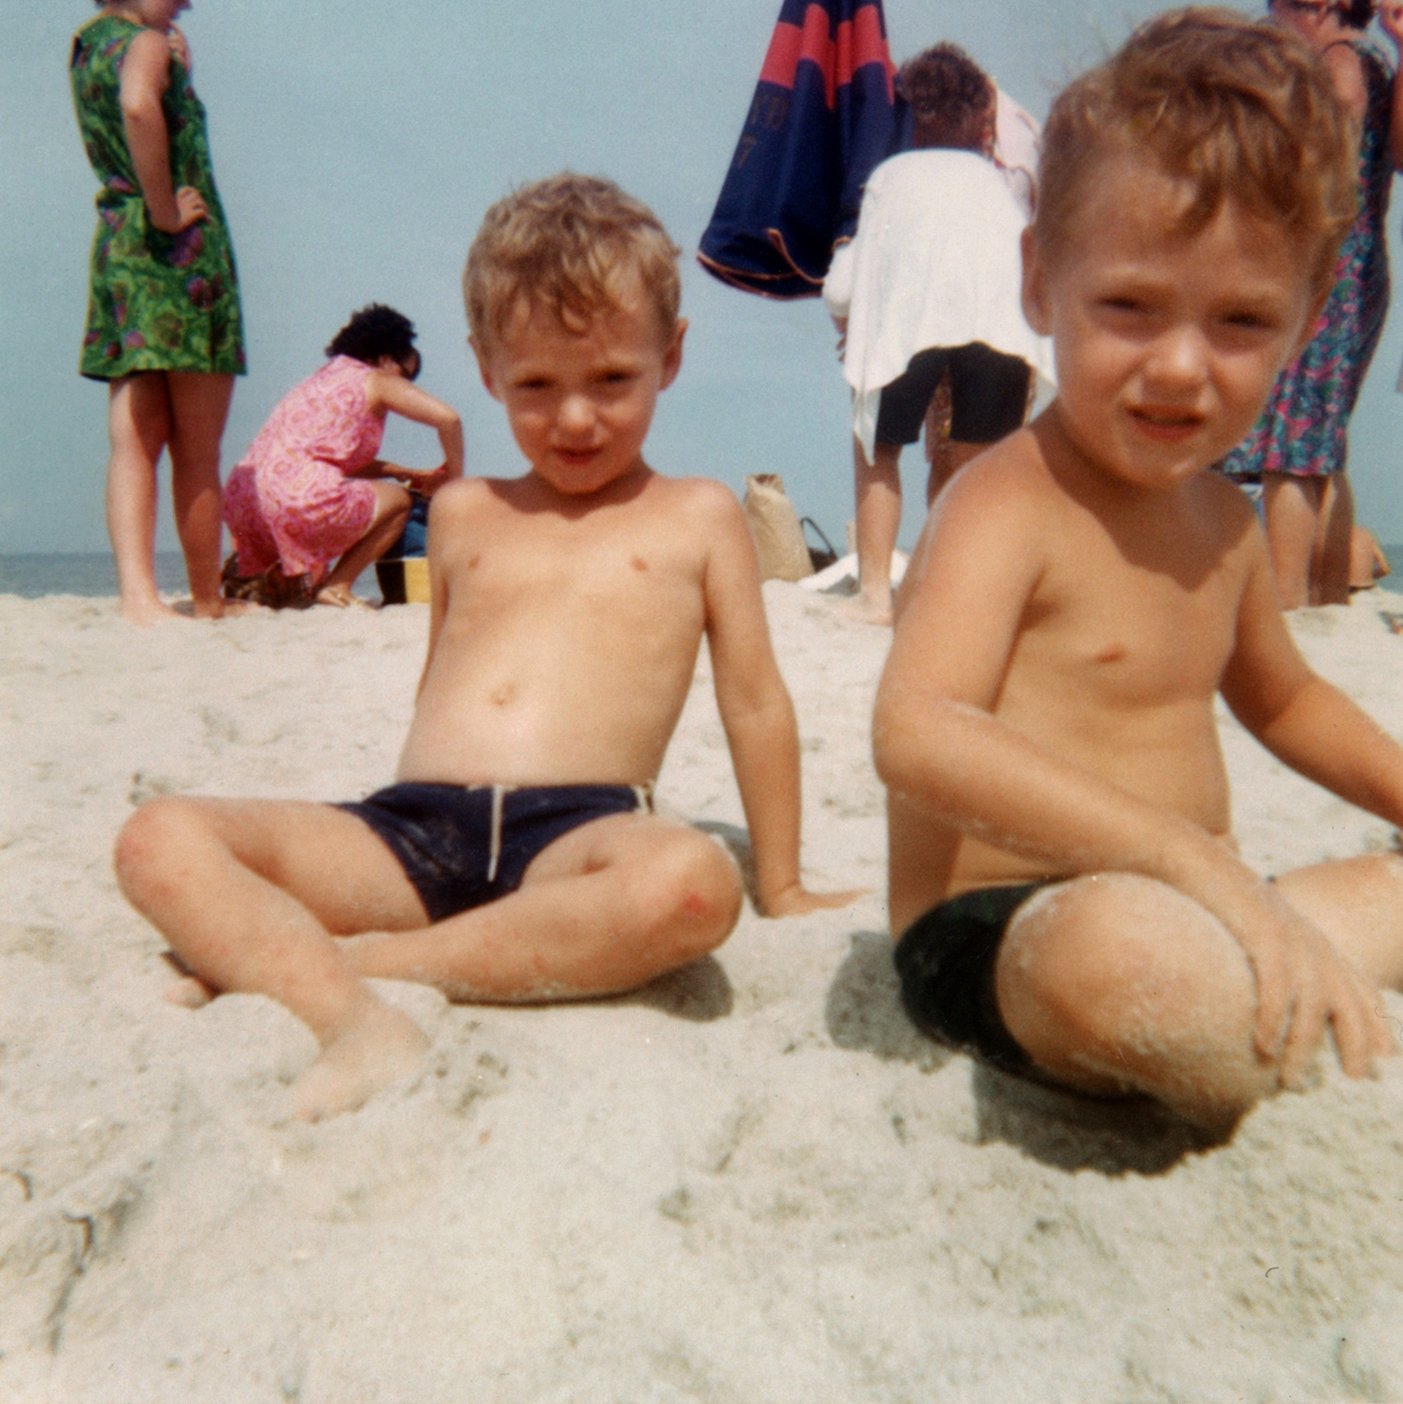 At age 6, Mark, left, and Scott at the beach on the Jersey Shore in 1970